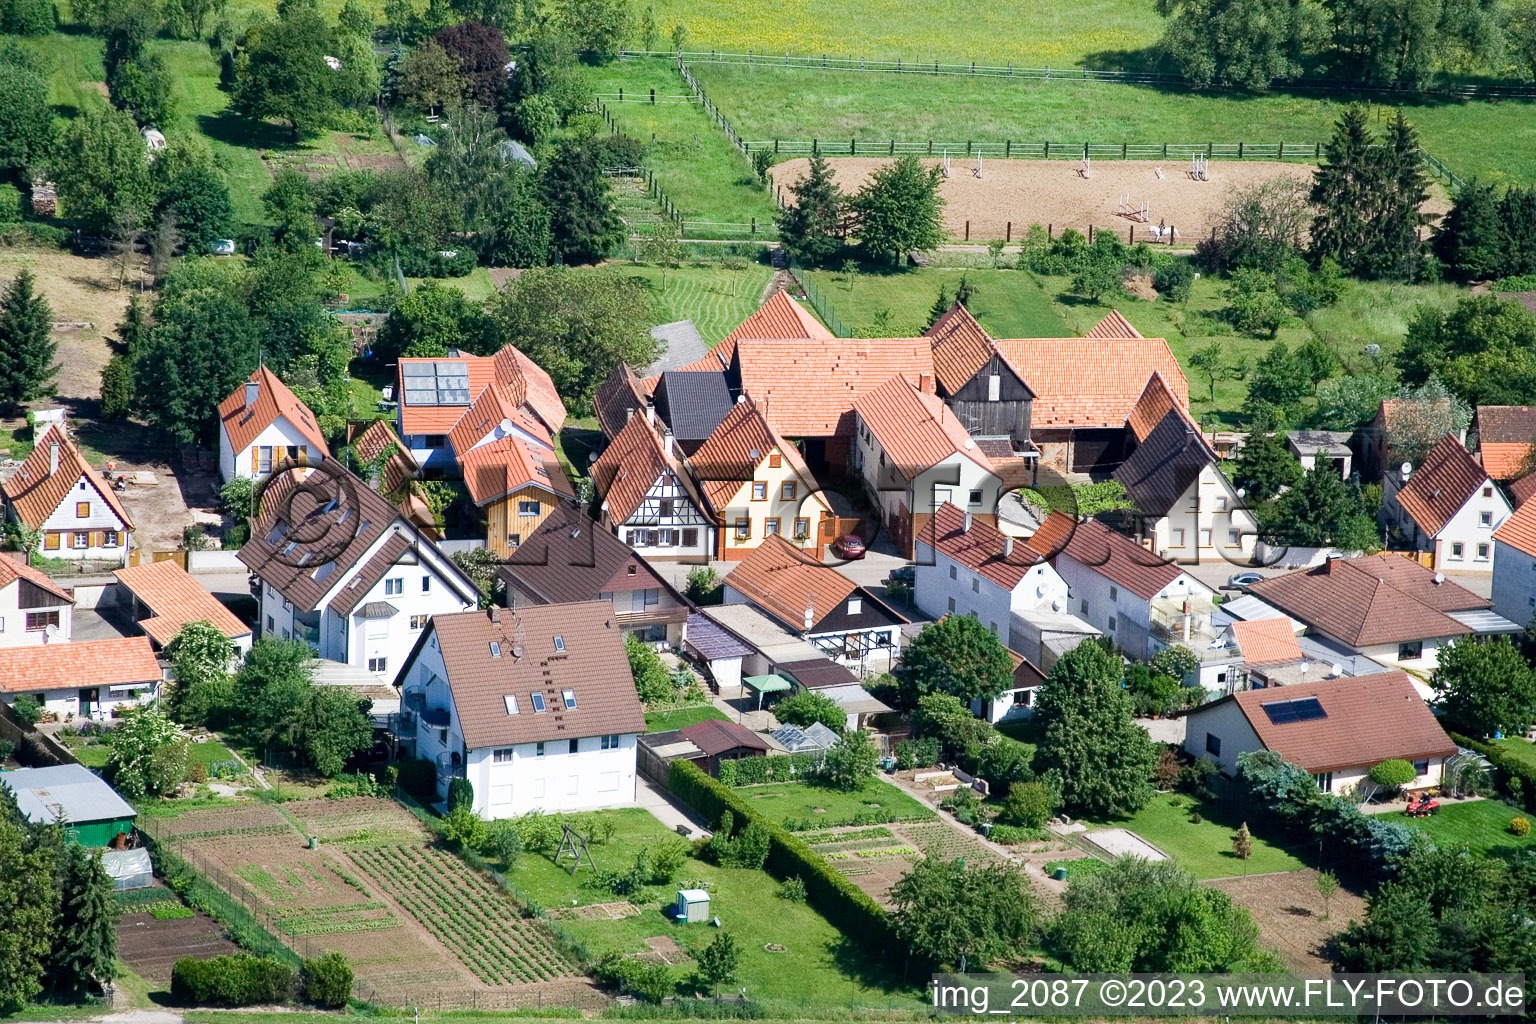 District Minderslachen in Kandel in the state Rhineland-Palatinate, Germany viewn from the air